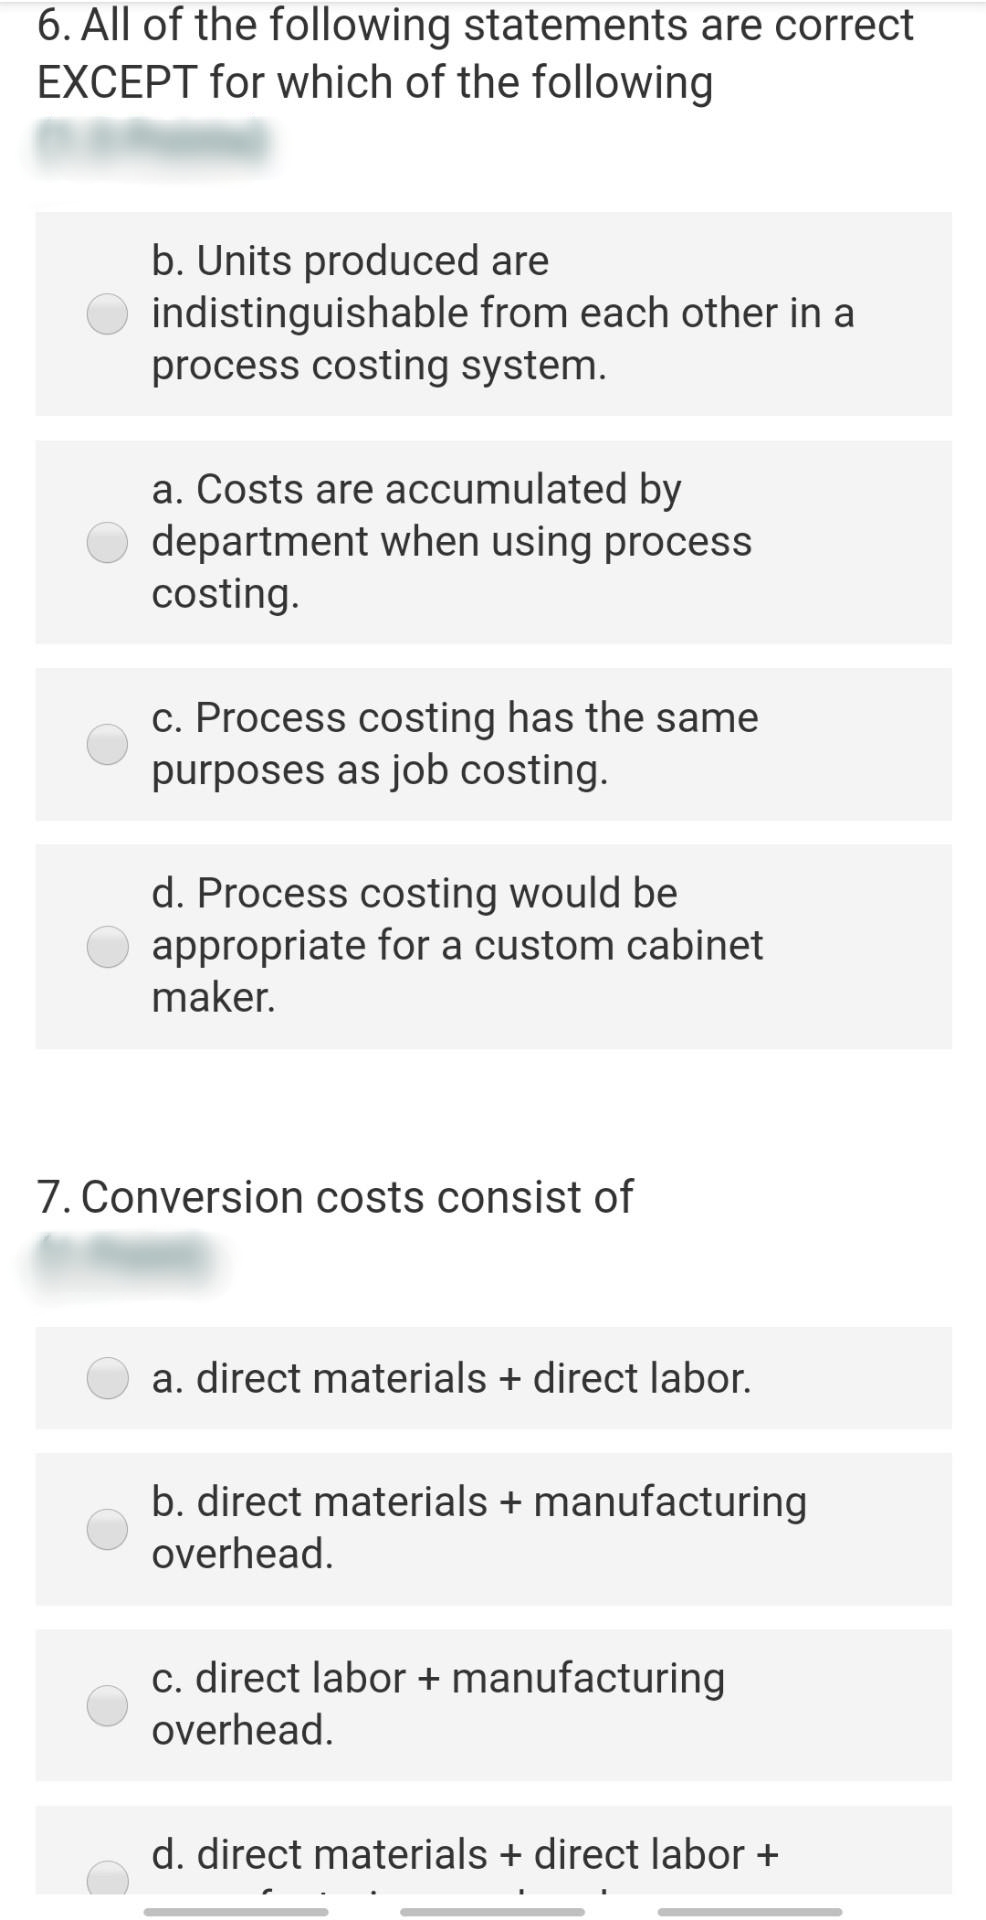 6. All of the following statements are correct
EXCEPT for which of the following
b. Units produced are
indistinguishable from each other in a
process costing system.
a. Costs are accumulated by
department when using process
costing.
c. Process costing has the same
purposes as job costing.
d. Process costing would be
appropriate for a custom cabinet
maker.
7. Conversion costs consist of
a. direct materials + direct labor.
b. direct materials + manufacturing
overhead.
c. direct labor + manufacturing
overhead.
d. direct materials + direct labor +
